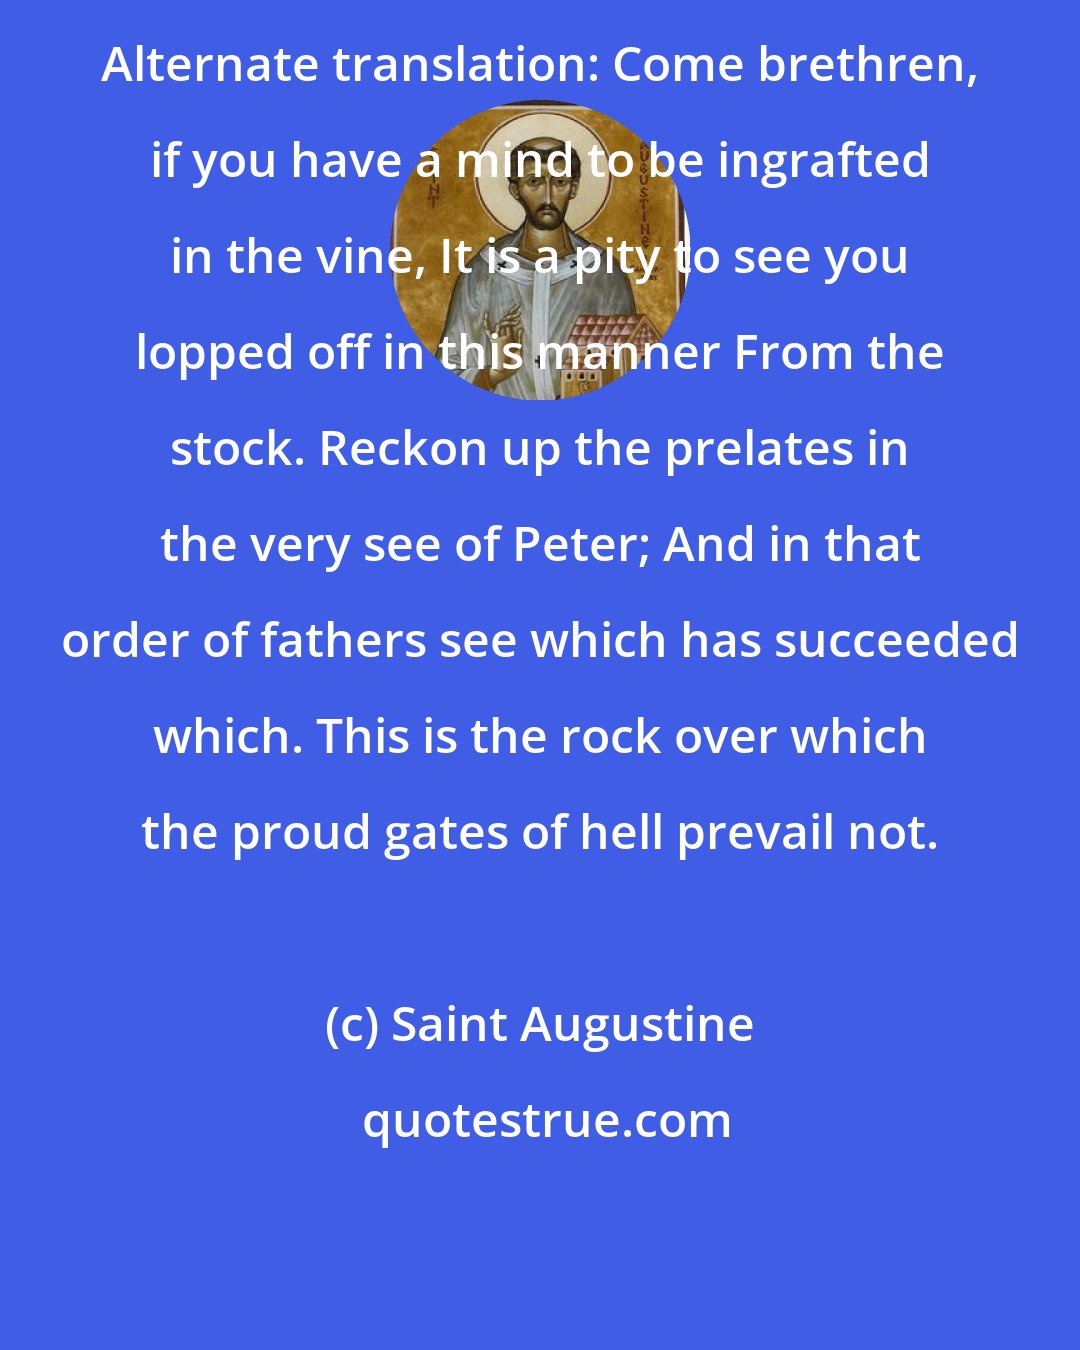 Saint Augustine: Alternate translation: Come brethren, if you have a mind to be ingrafted in the vine, It is a pity to see you lopped off in this manner From the stock. Reckon up the prelates in the very see of Peter; And in that order of fathers see which has succeeded which. This is the rock over which the proud gates of hell prevail not.